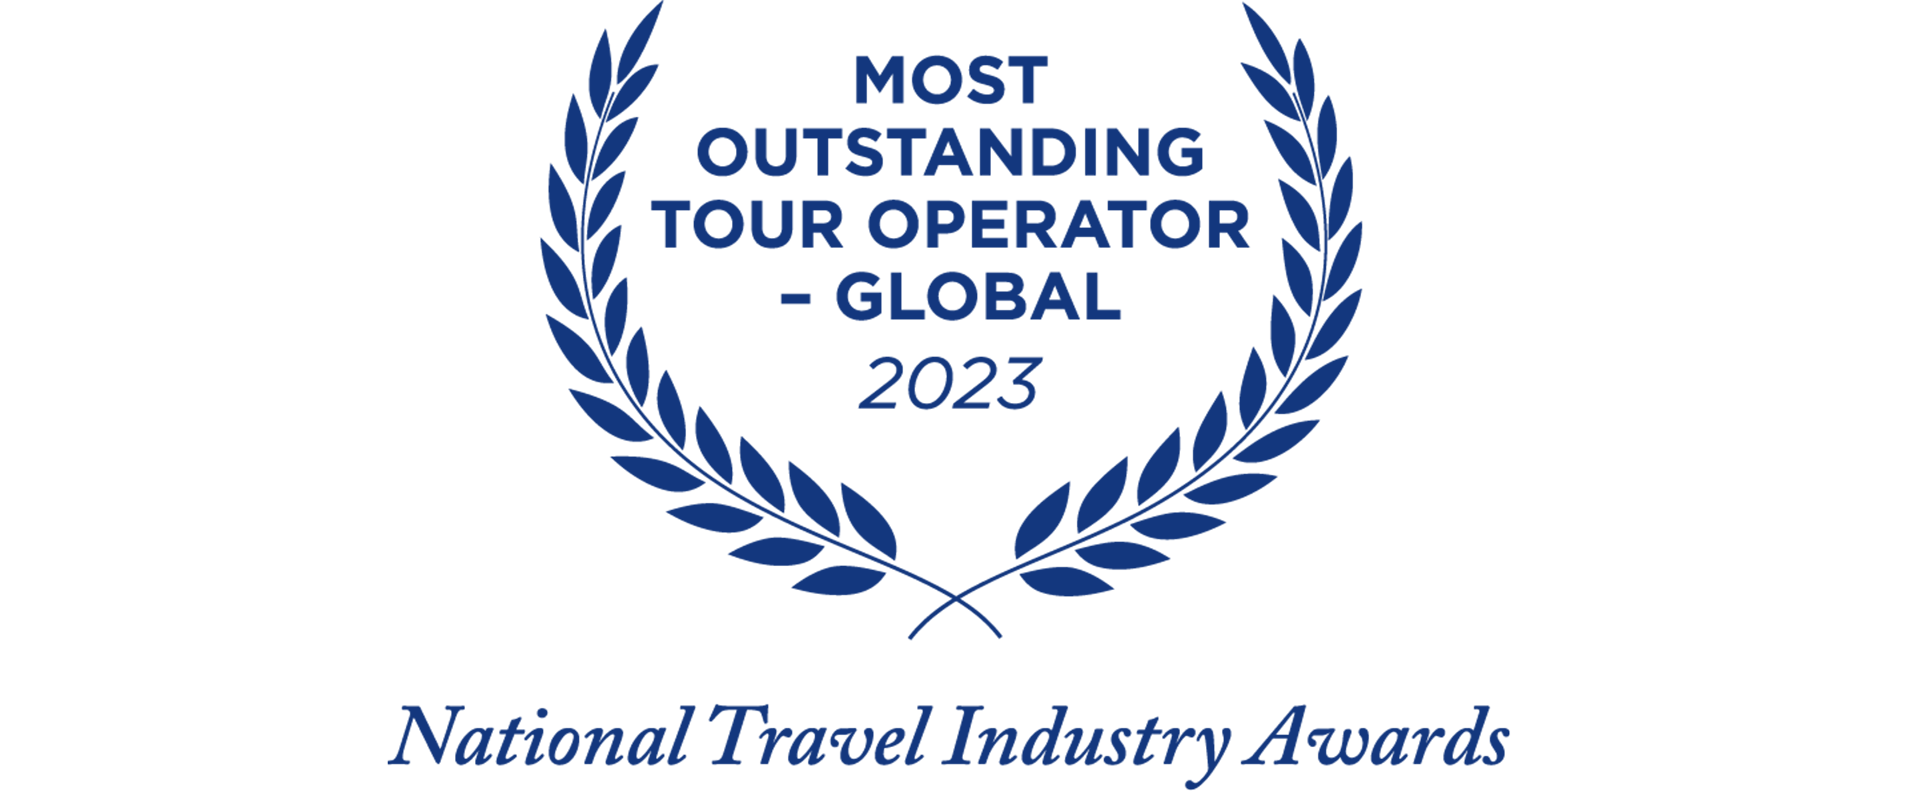 Most outstanding tour operator global 2023 logo in navy